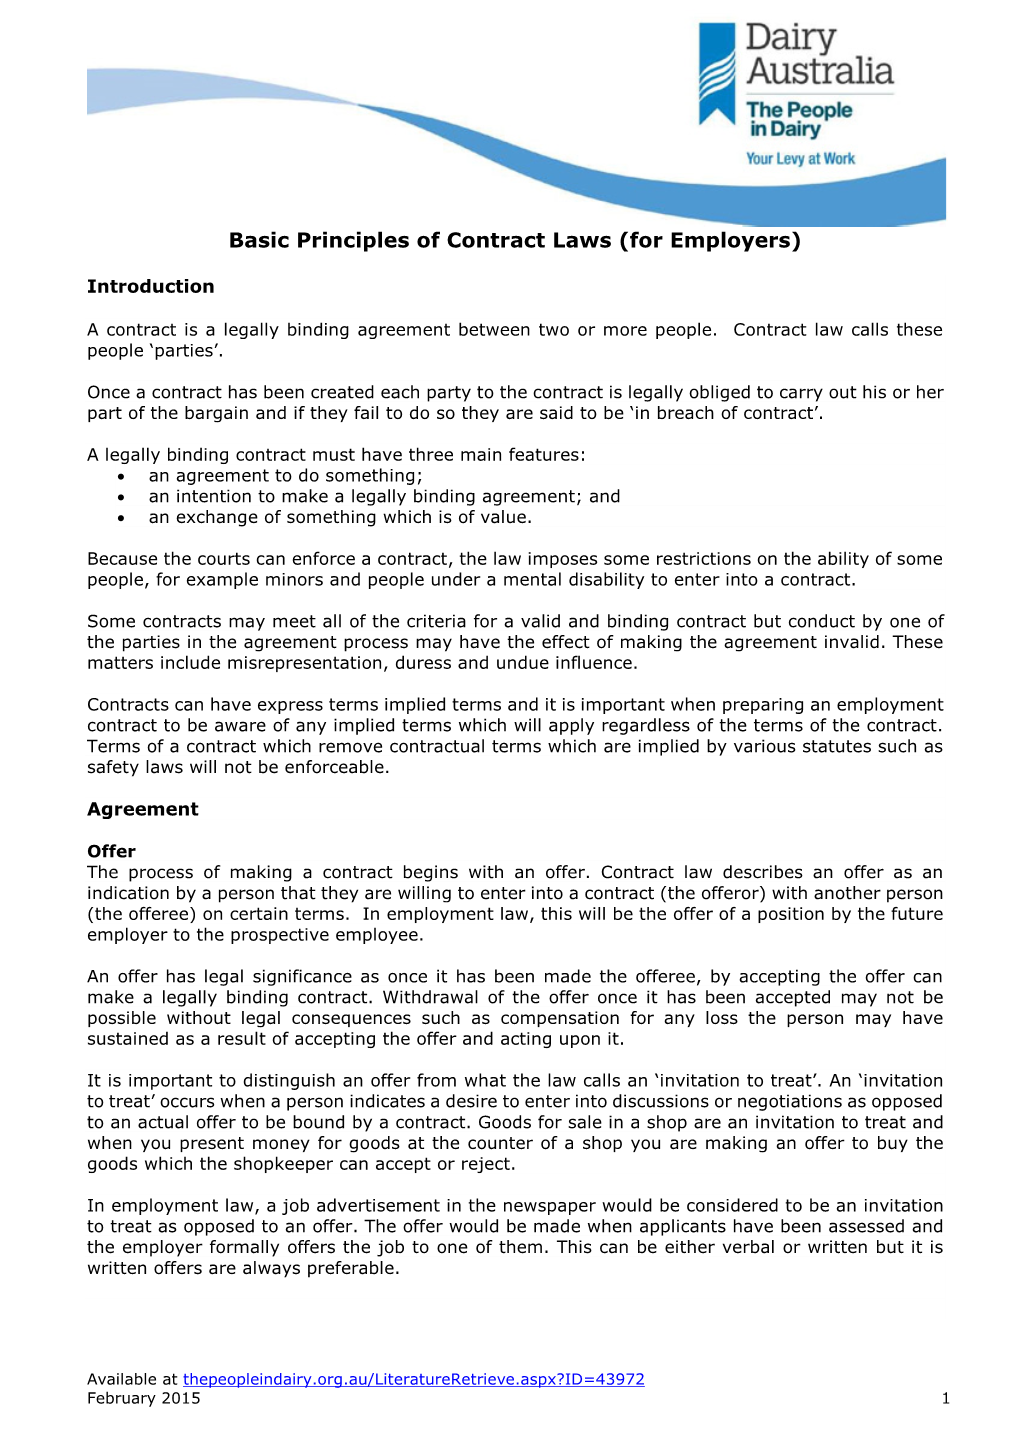 Basic Principles of Contract Laws (For Employers)